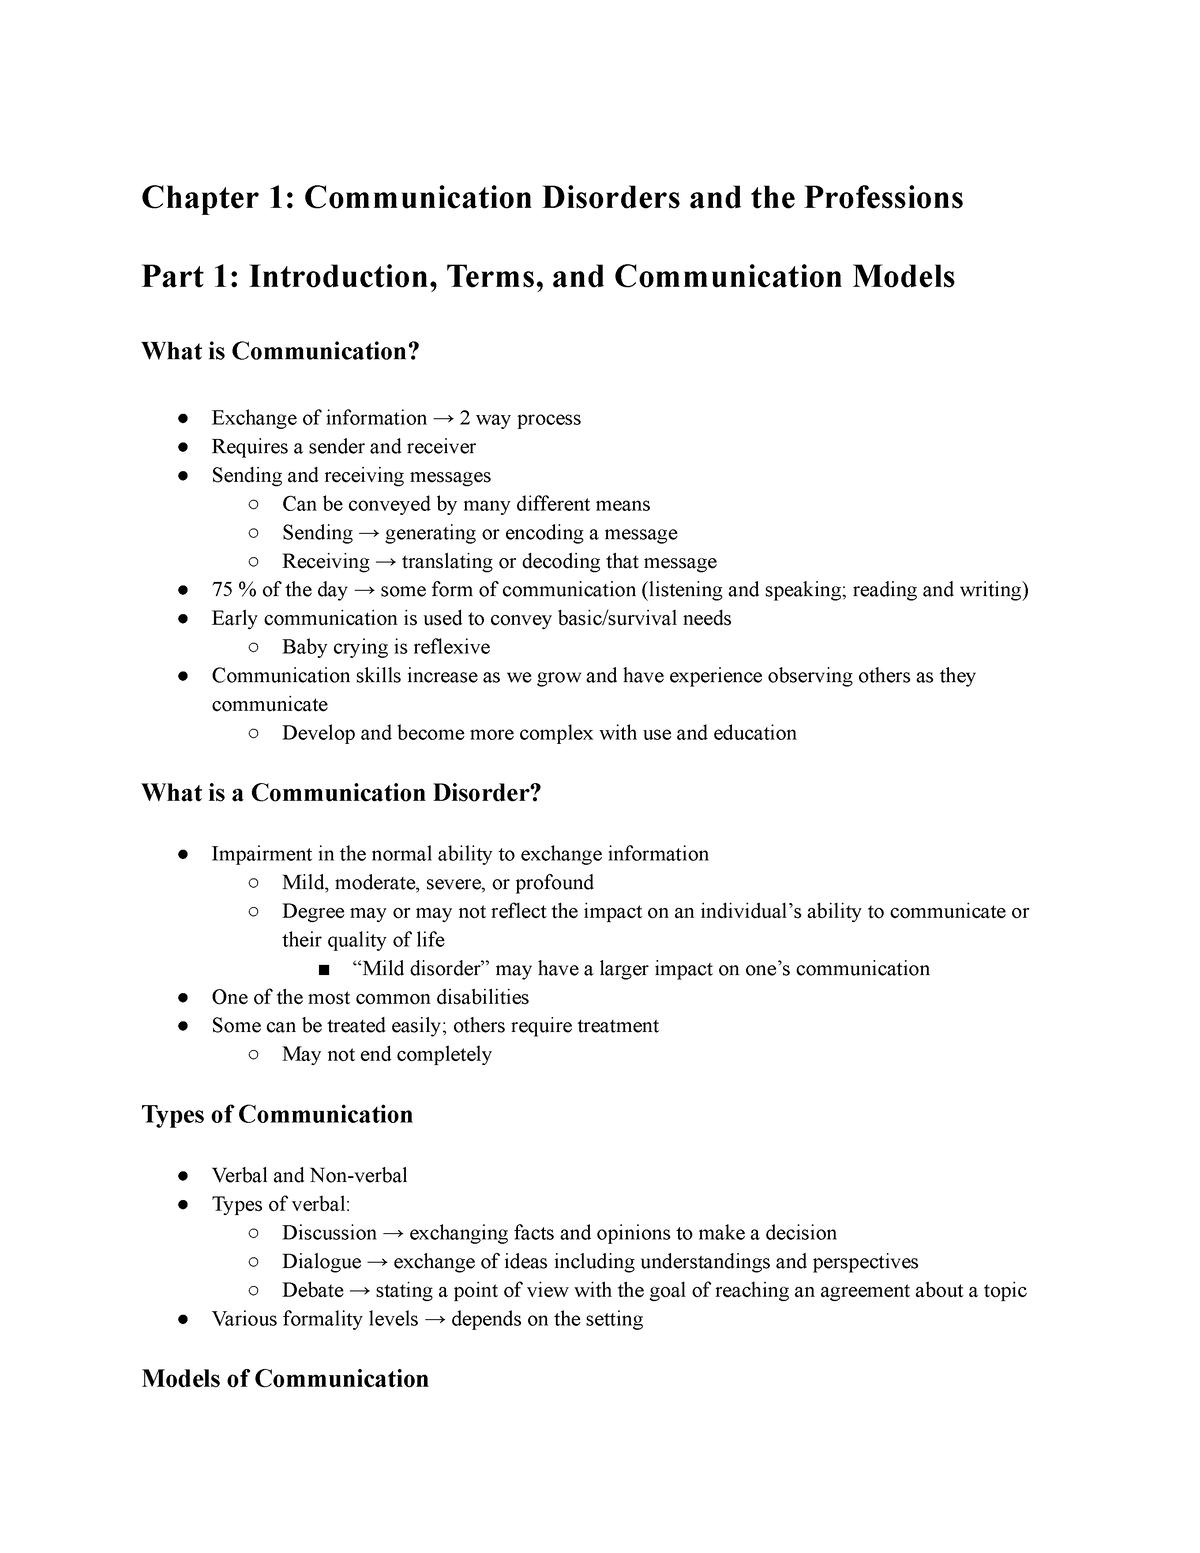 communication disorders research paper topics